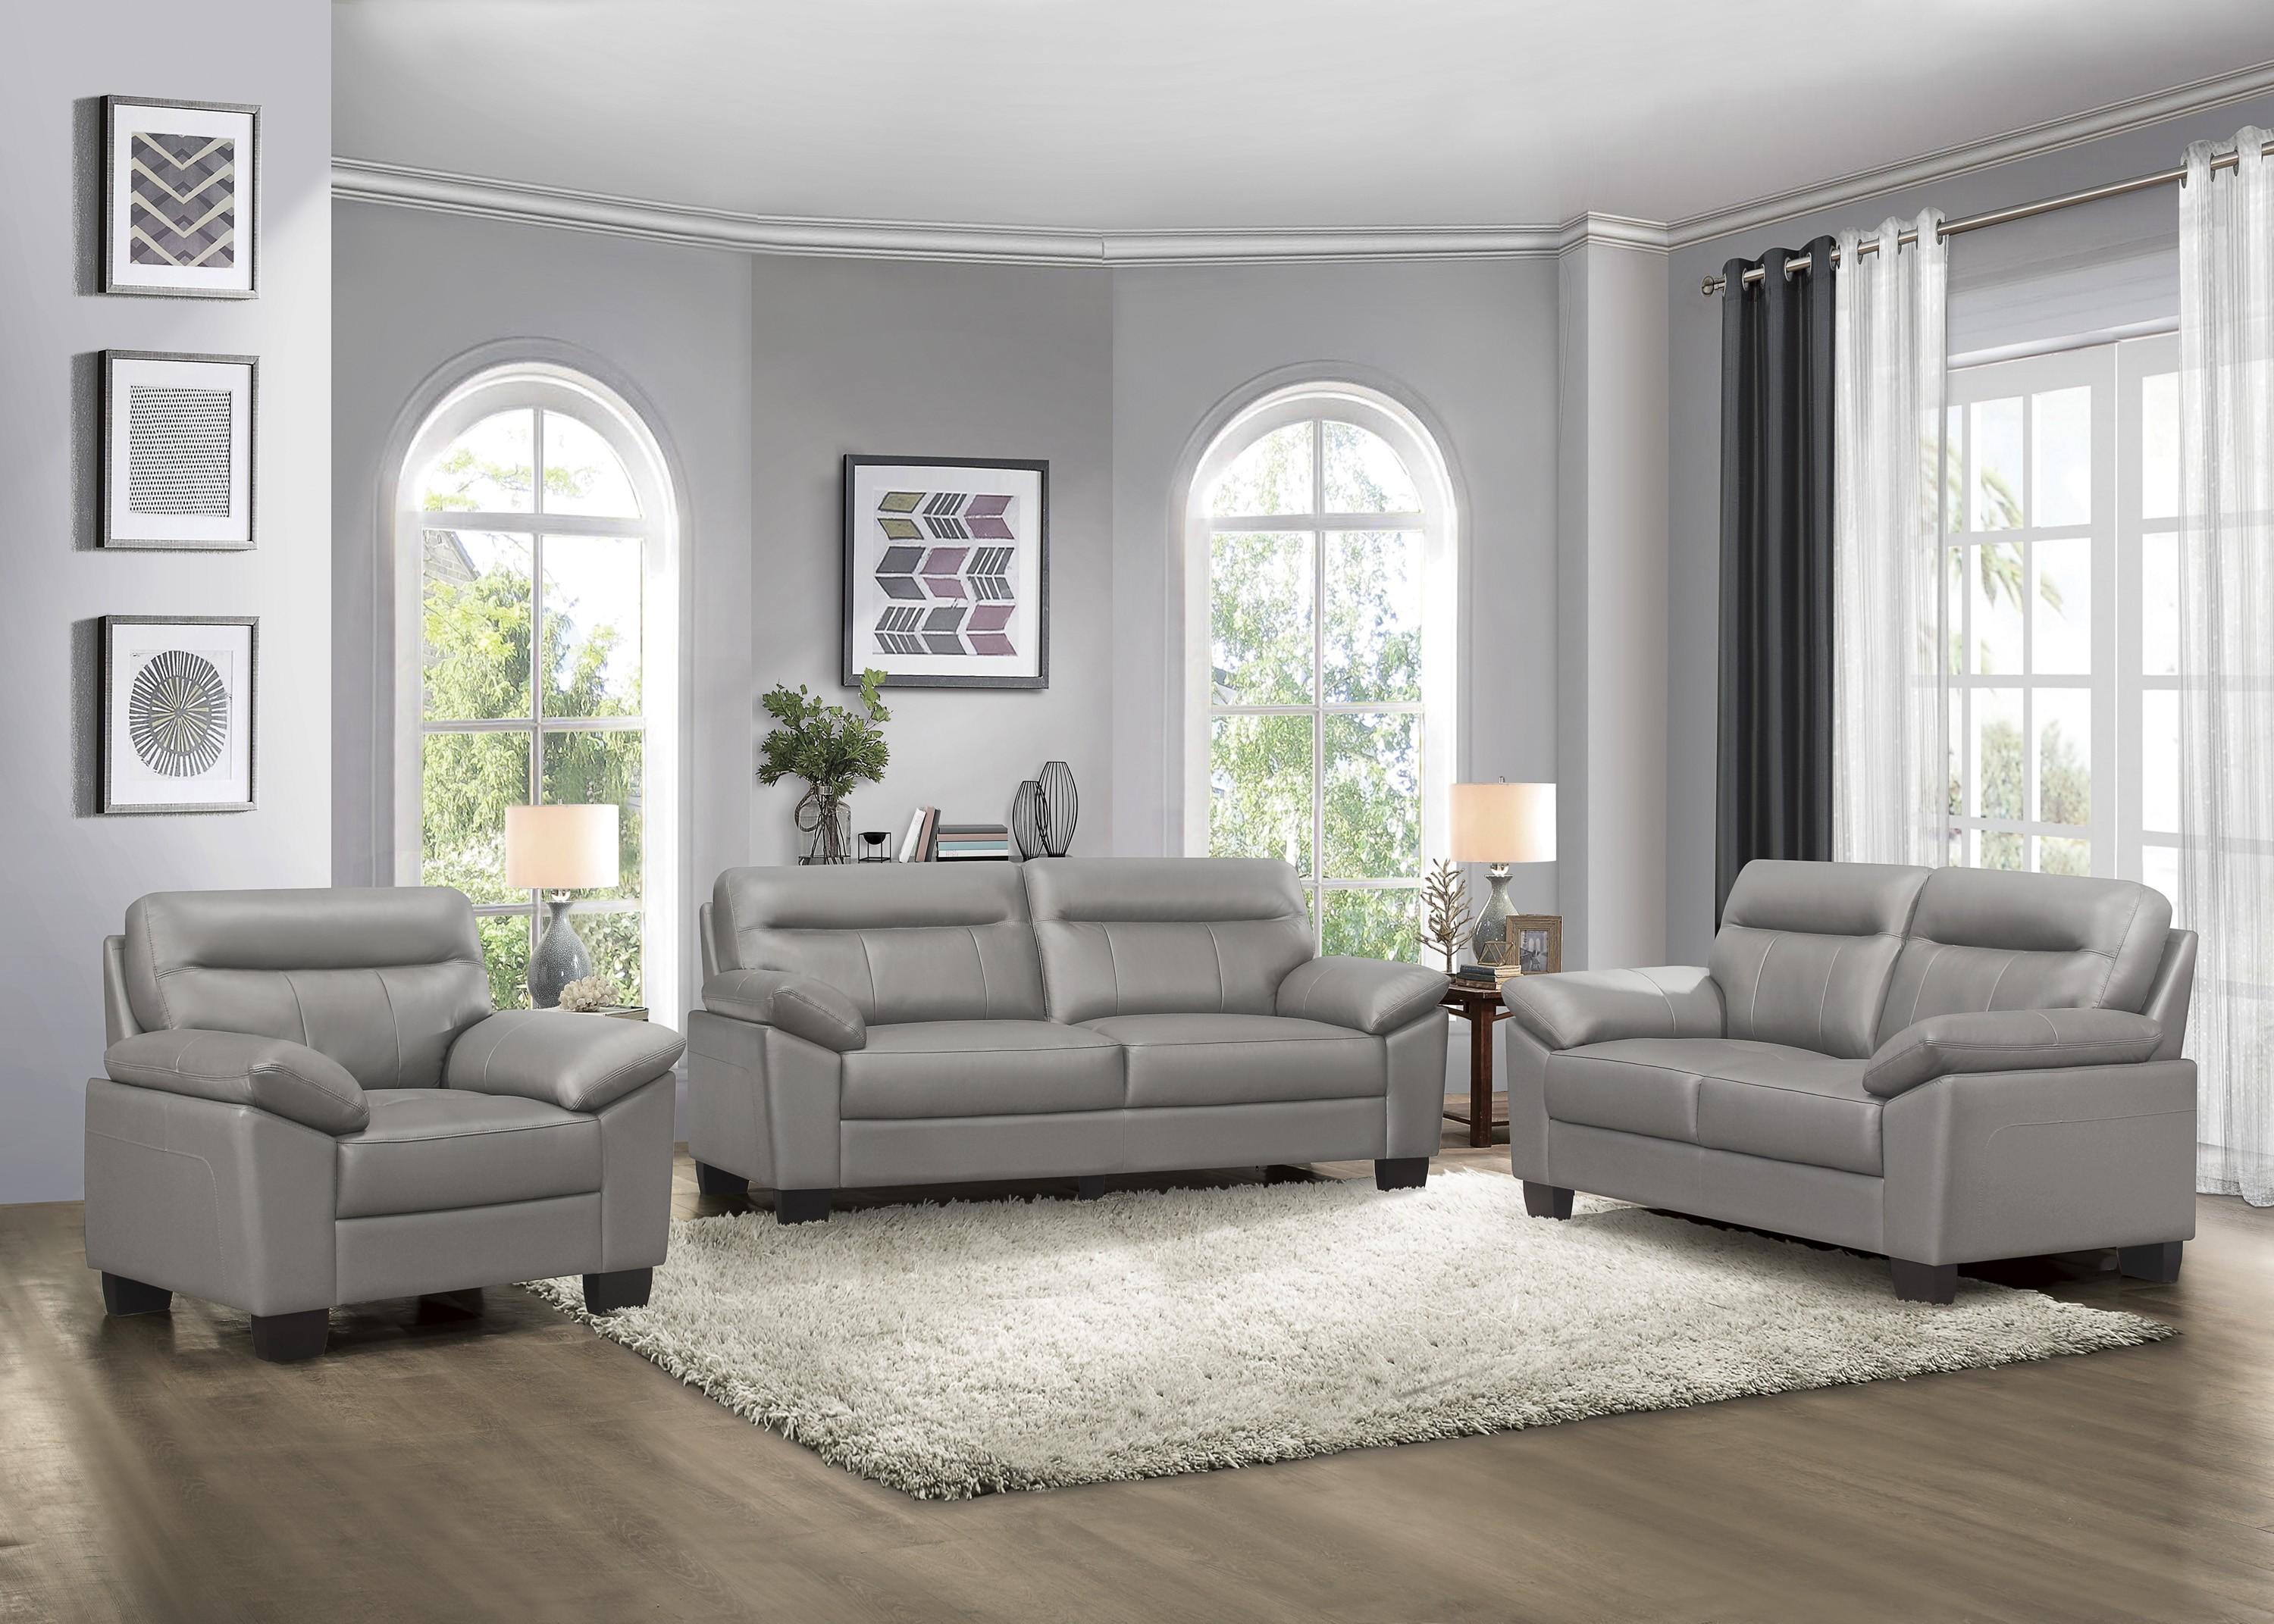 Modern Living Room Set 9537GRY-3PC Denizen 9537GRY-3PC in Gray Leather